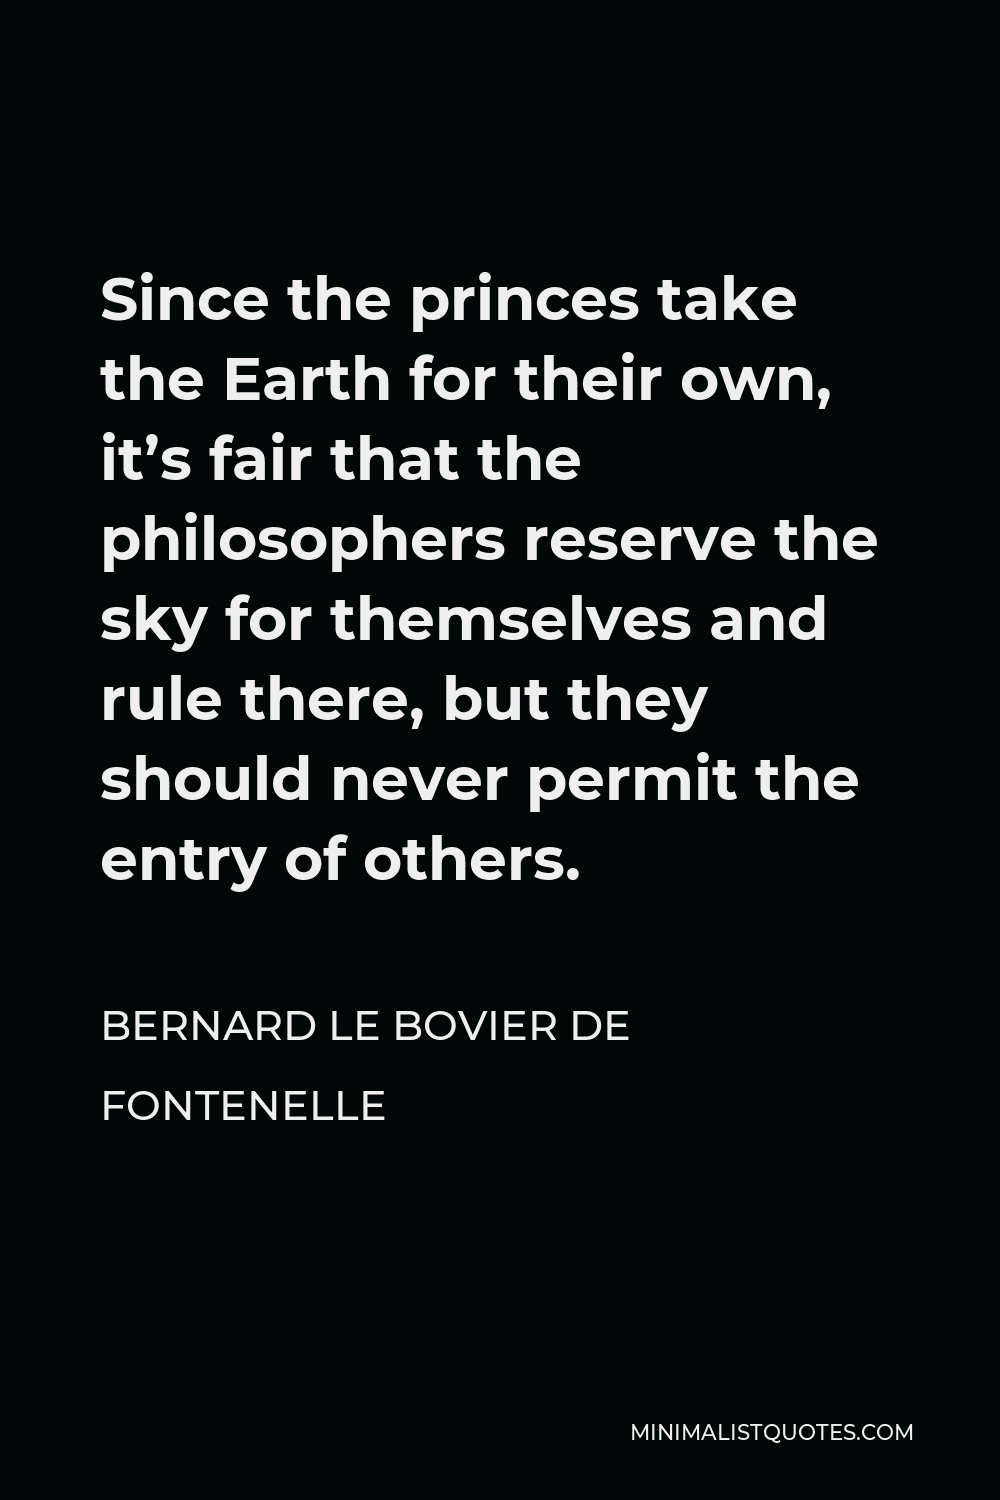 Bernard le Bovier de Fontenelle Quote - Since the princes take the Earth for their own, it’s fair that the philosophers reserve the sky for themselves and rule there, but they should never permit the entry of others.